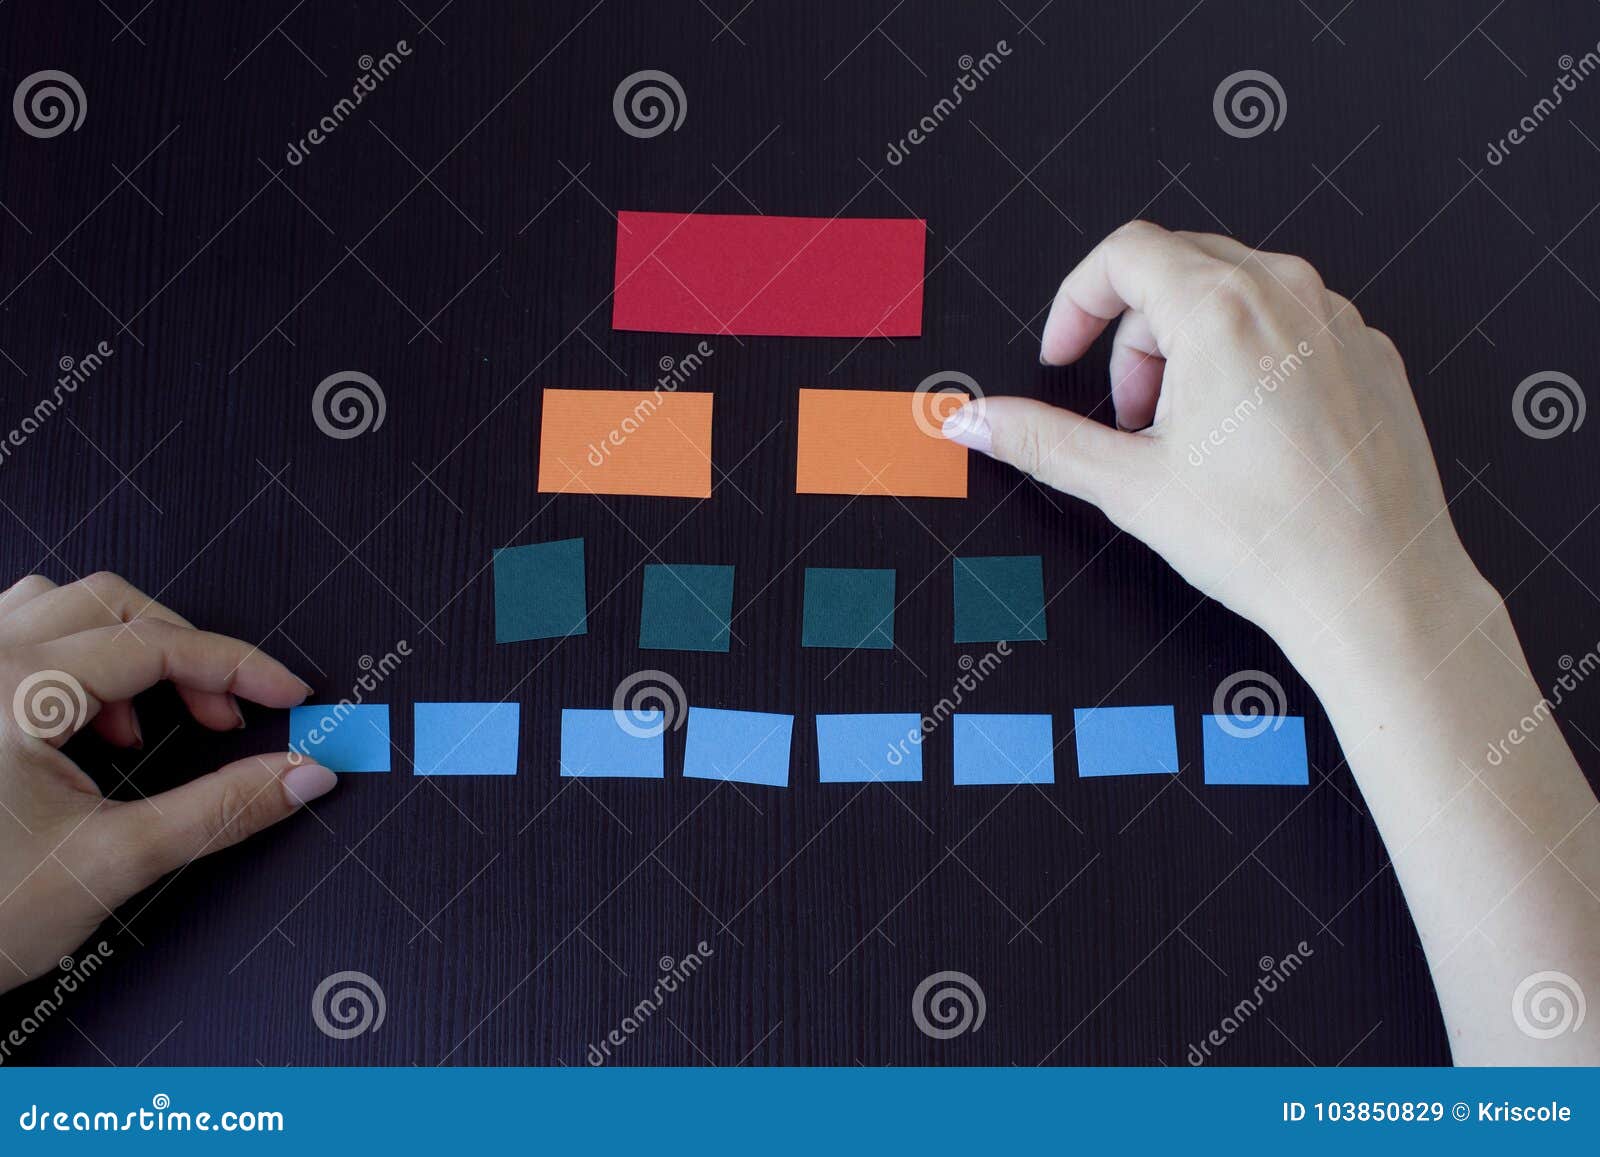 Block Diagram From The Paper  Female Hands Simulating The